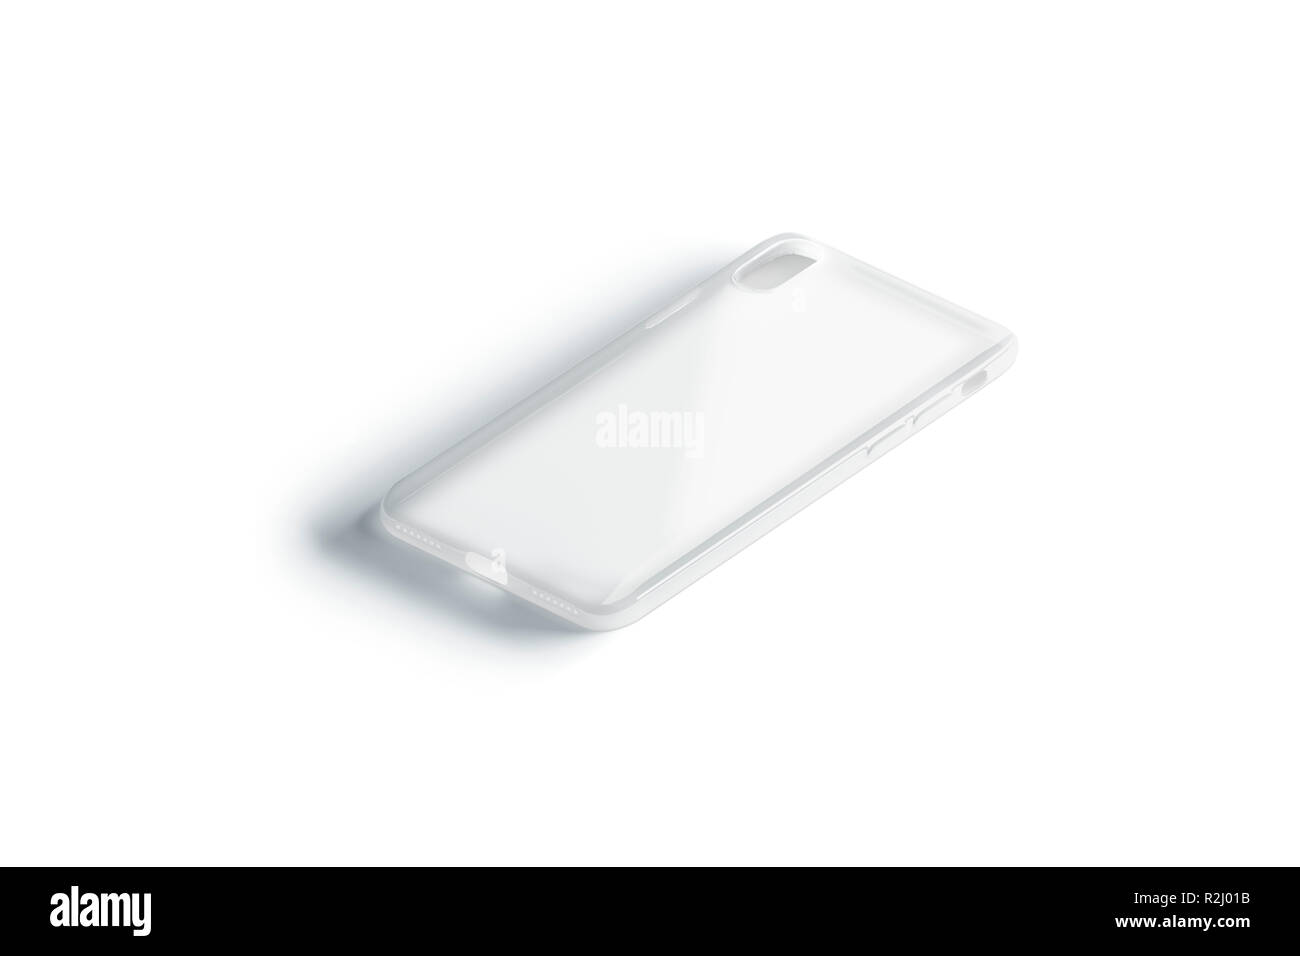 Download Blank transparent phone case mockup, isolated, side view ...